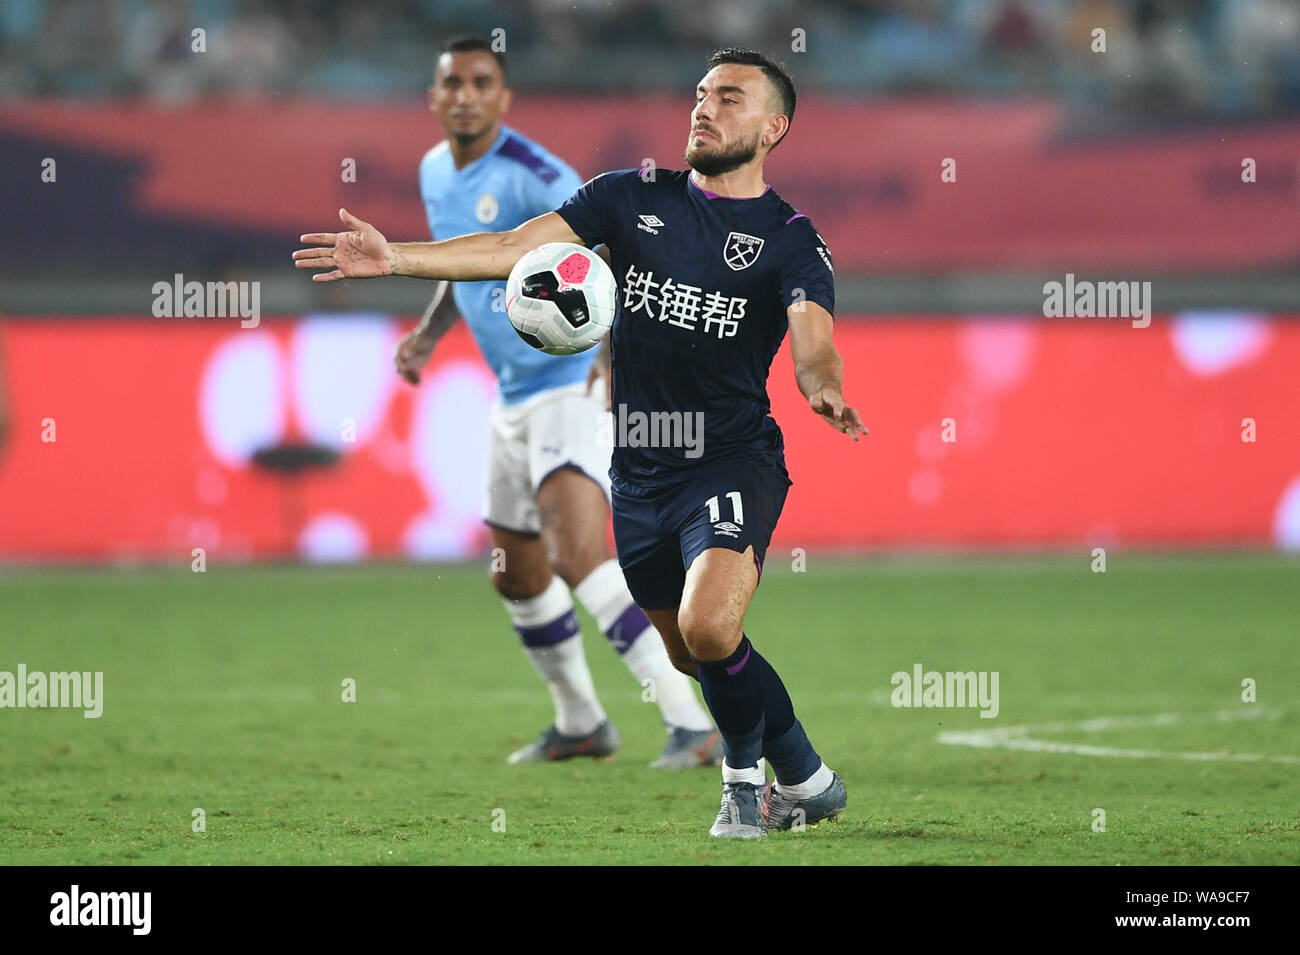 Scottish football player Robert Snodgrass of West Ham United F.C. of English League champions dribbles against Manchester City F.C. in the semifinal m Stock Photo